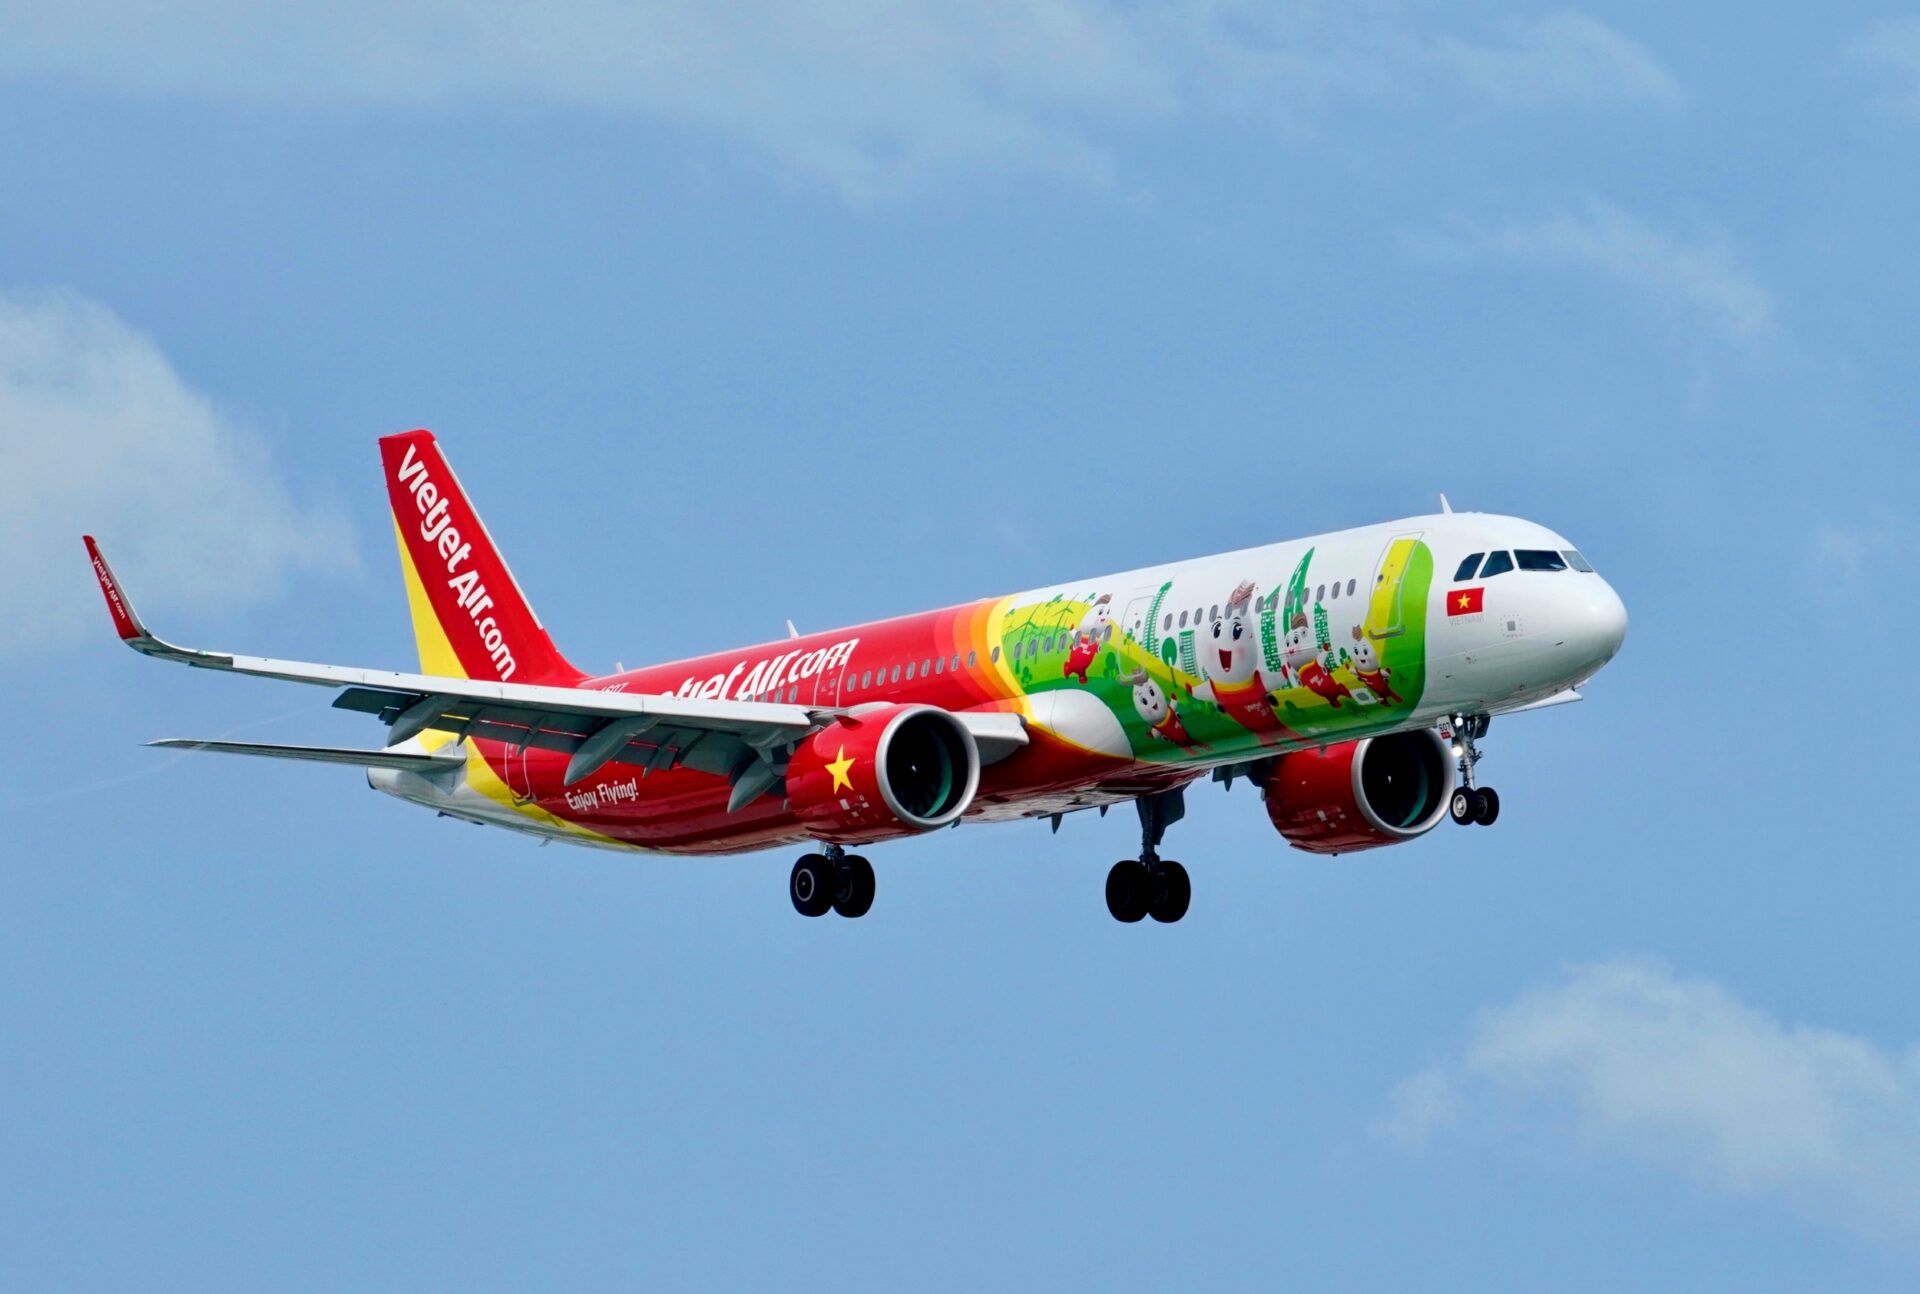 VietJet to connect Ho Chi Minh City with Chengdu from Feb 10